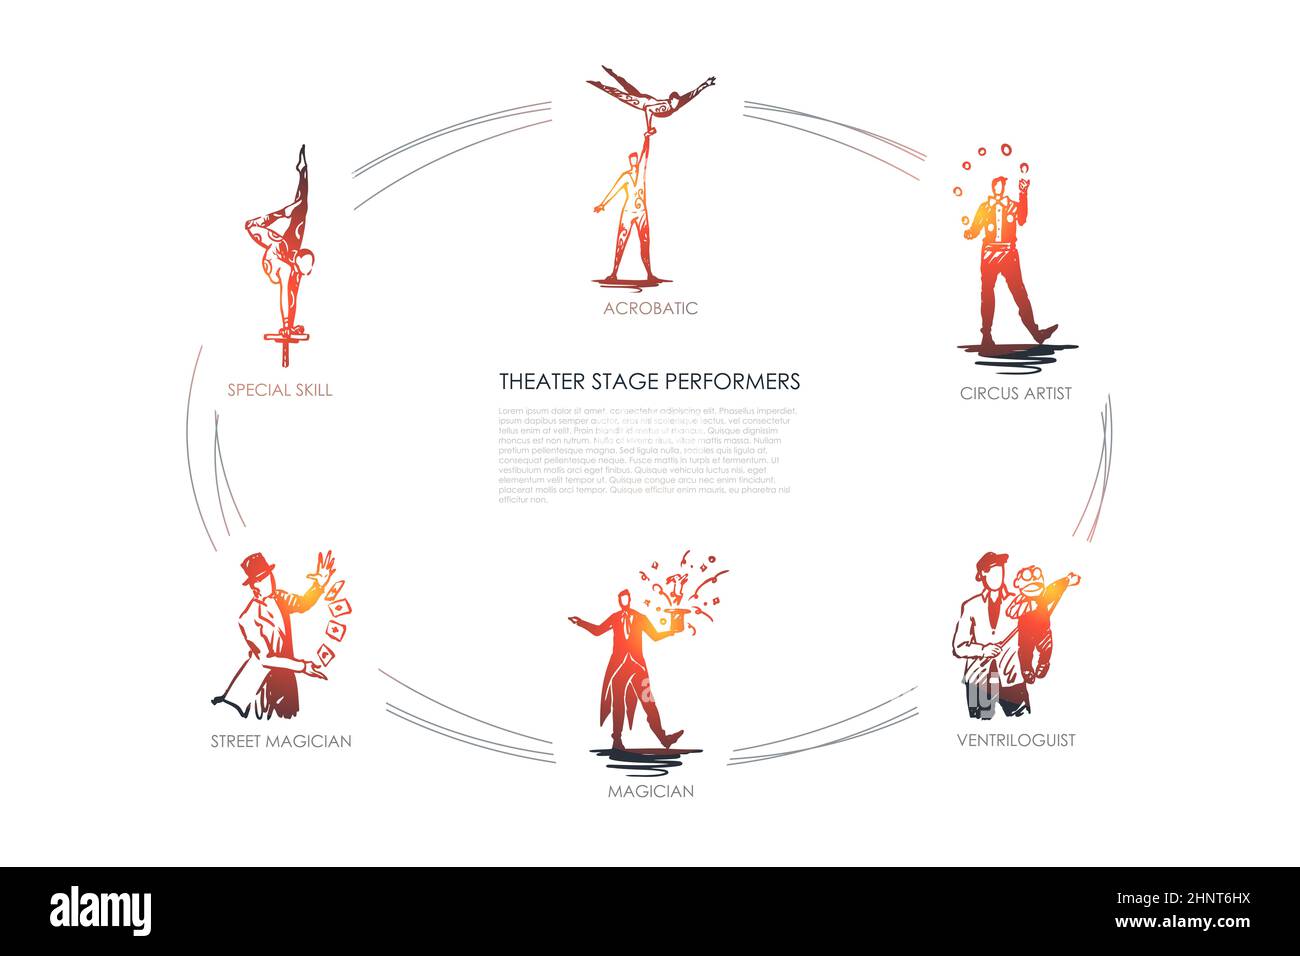 Theatre stage performance - acrobatic, circus artist, ventriloguist, magician, street magician, special skill vector concept set. Hand drawn sketch is Stock Photo